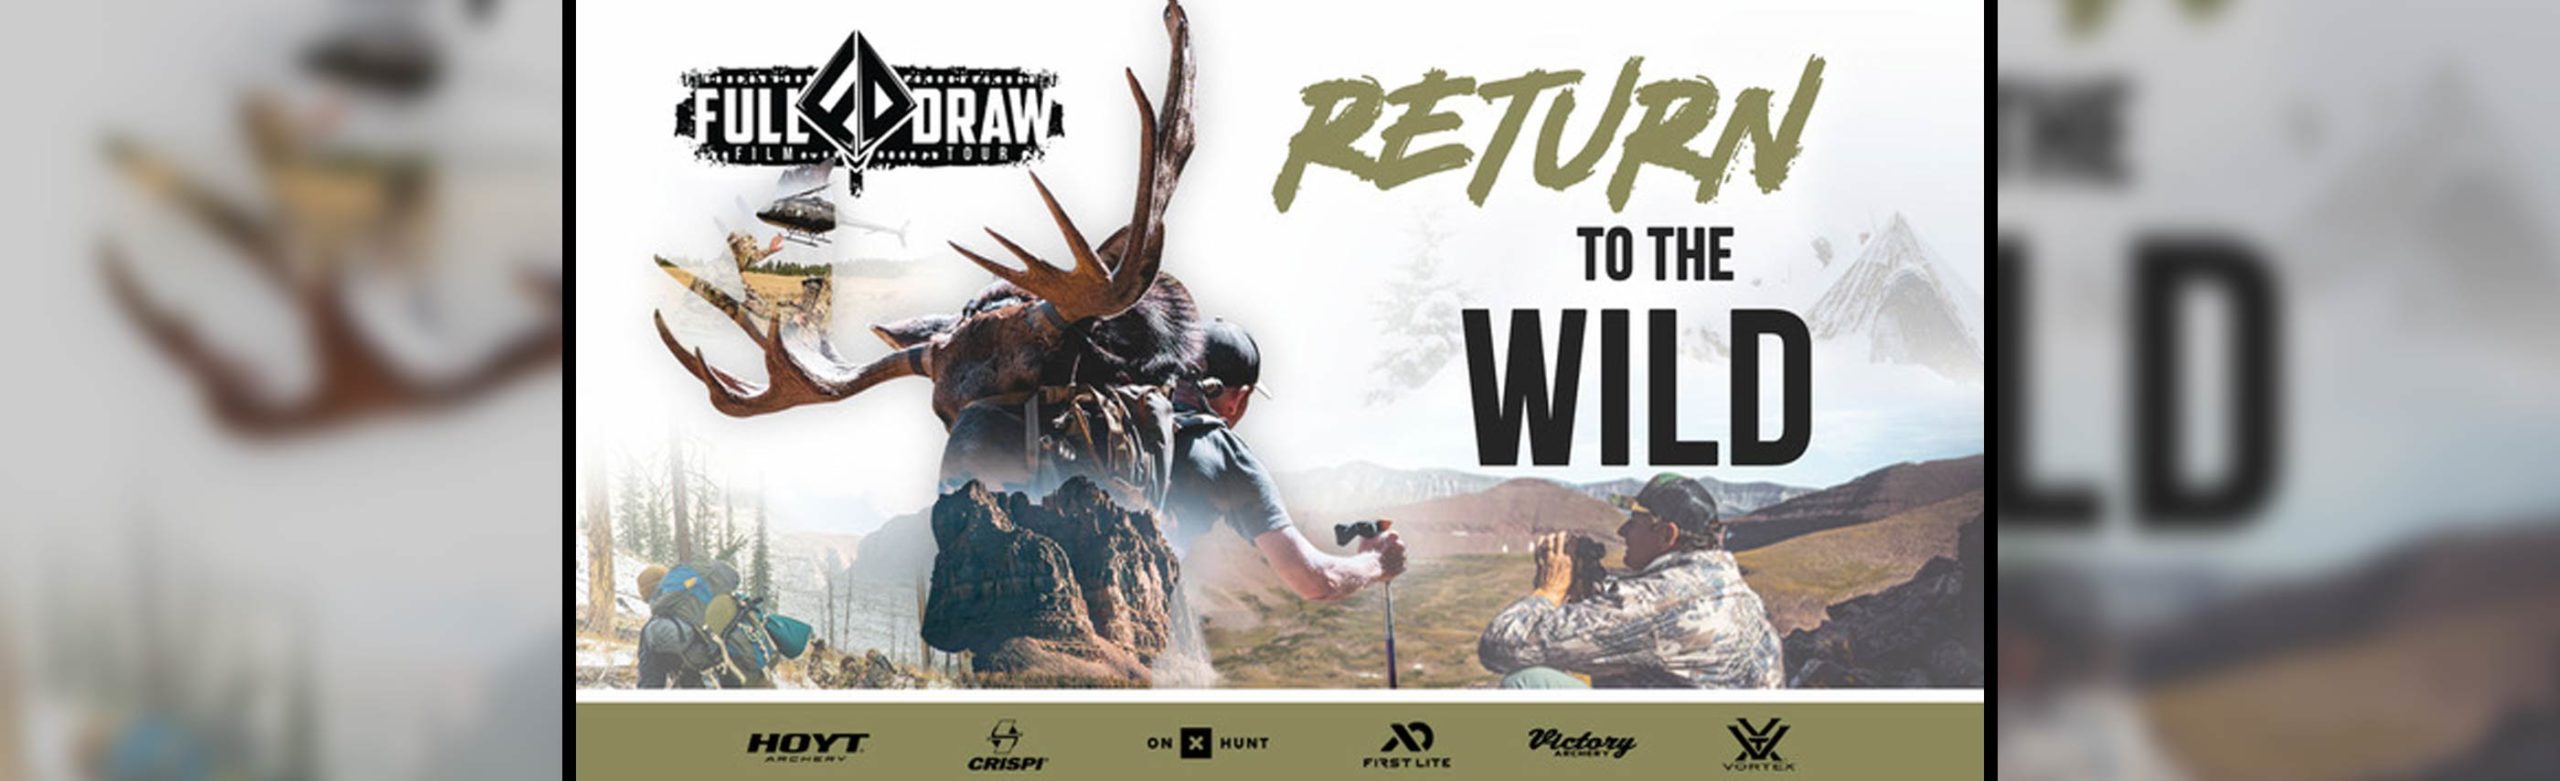 Event Info: 2021 Full Draw Film Tour – Return to the Wild at the Wilma Image